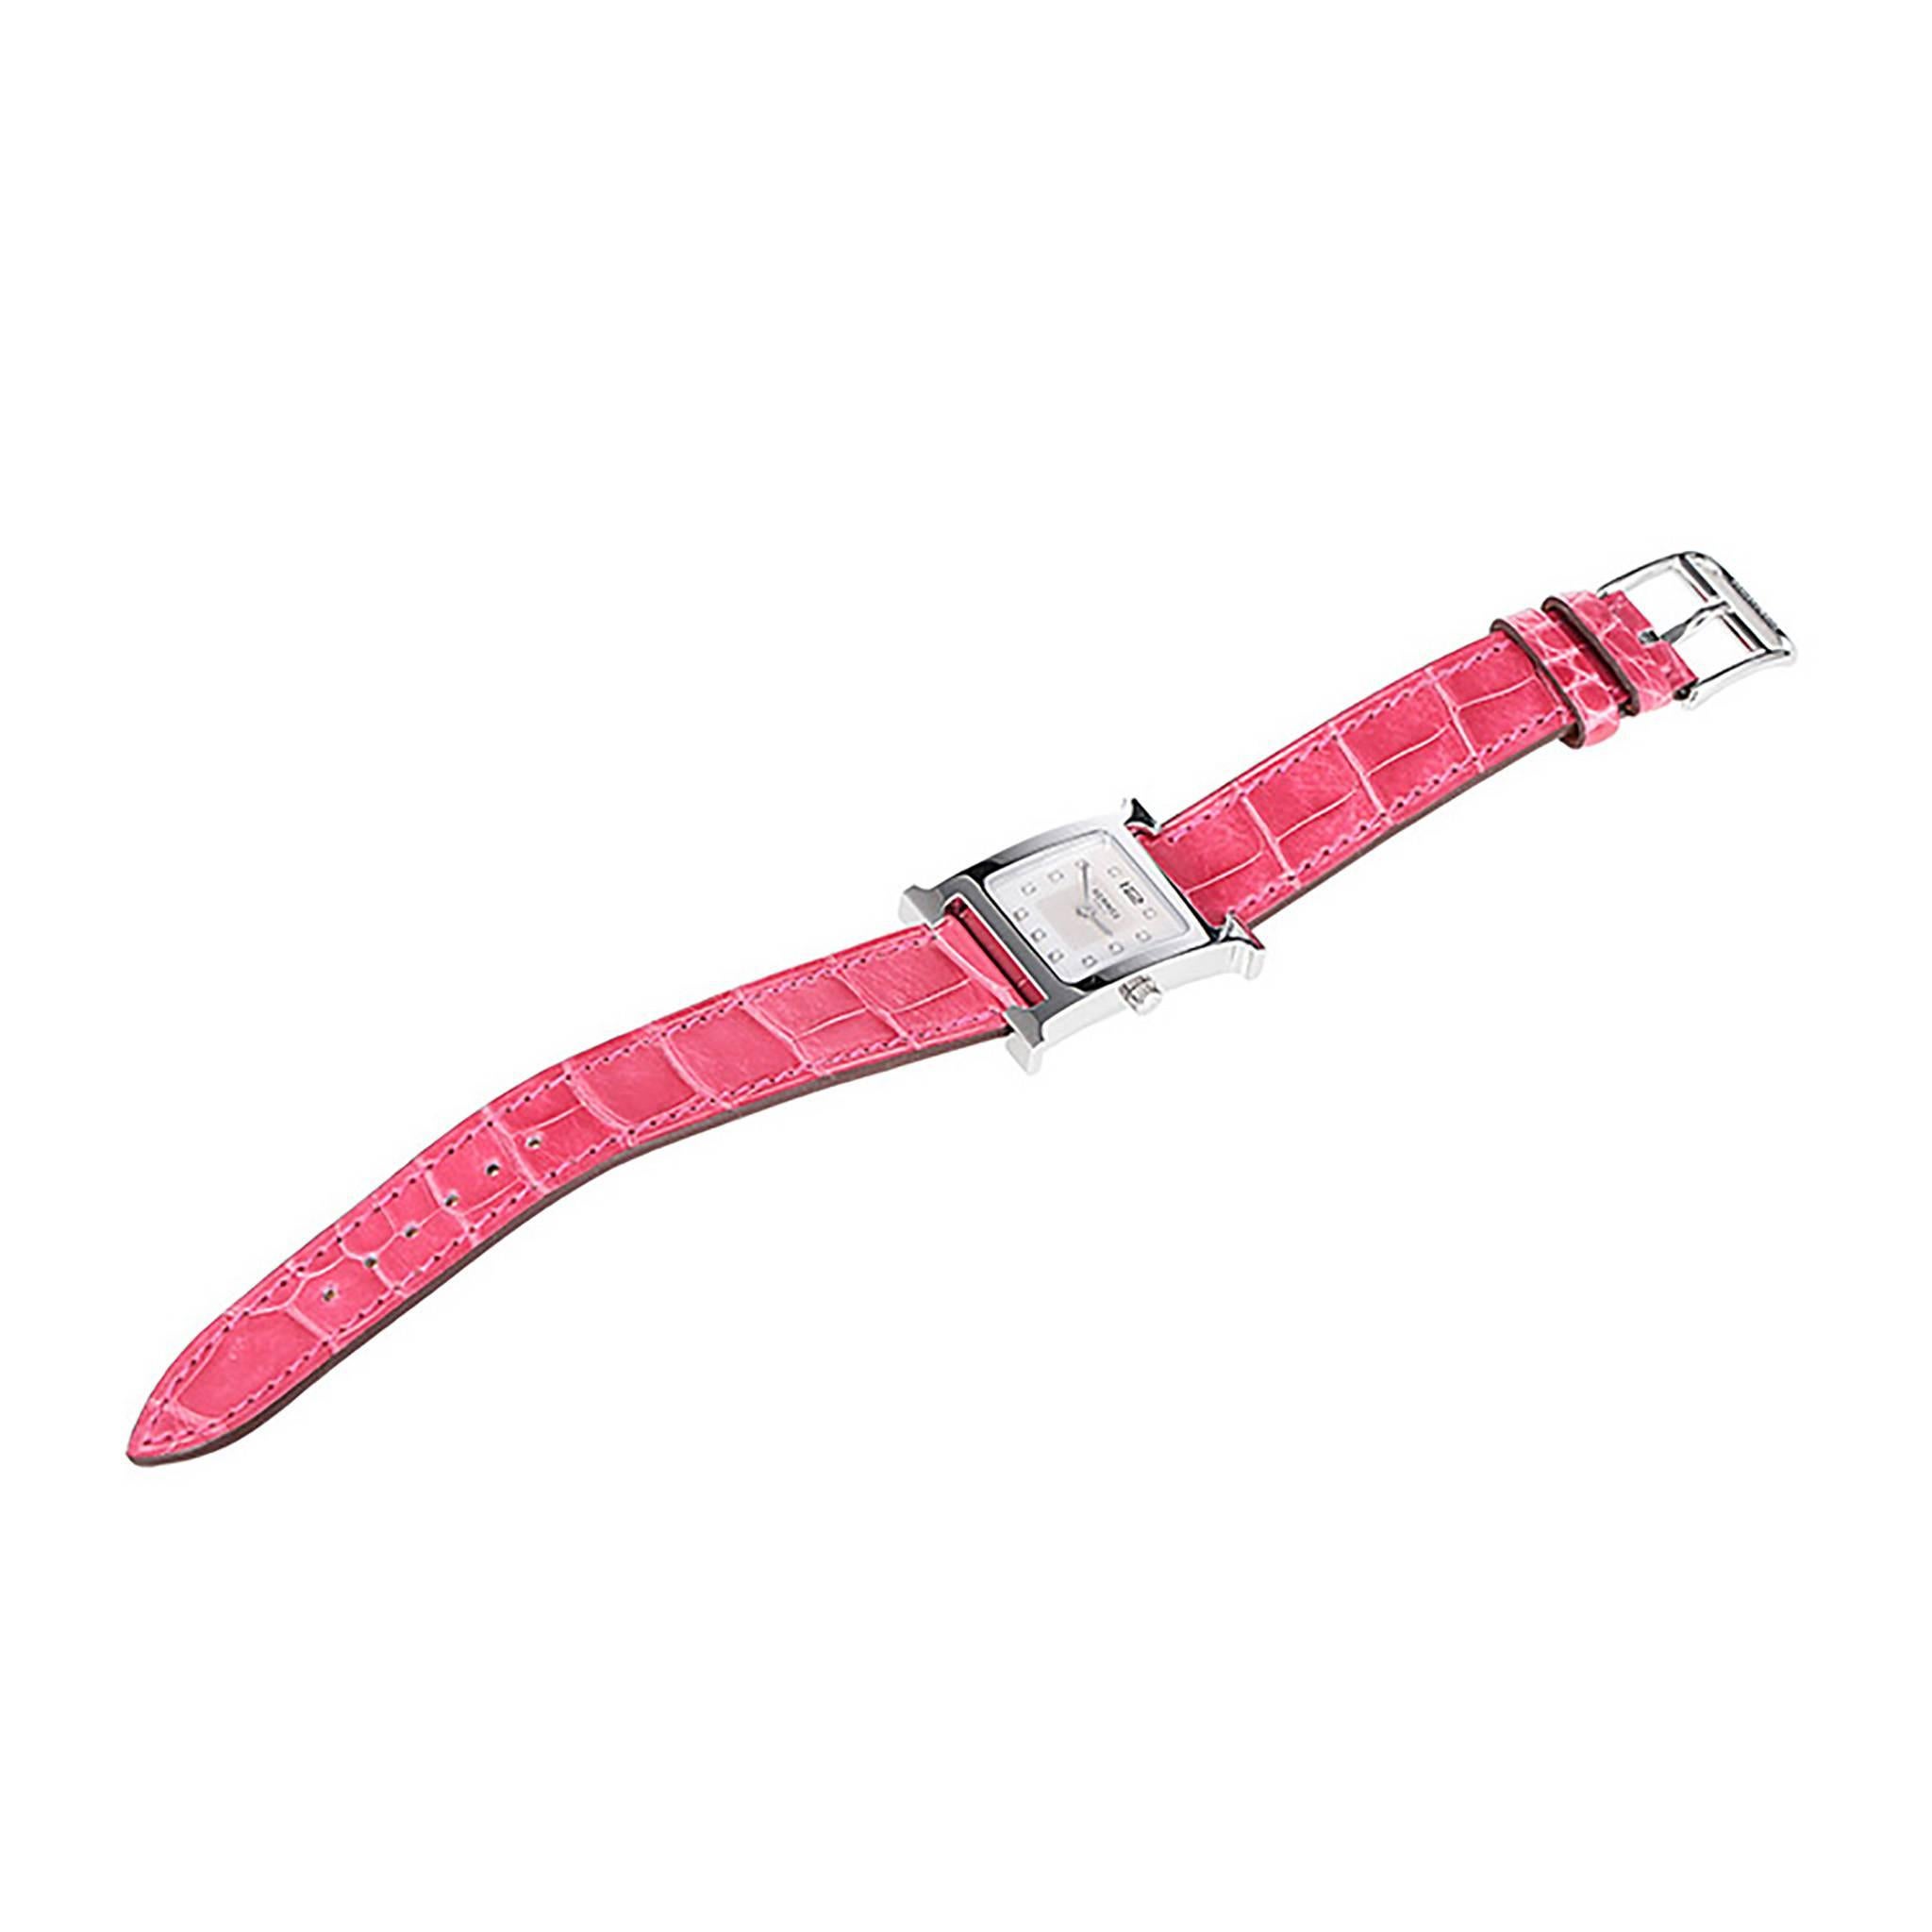 Hermes "Heure H" Watch 21 x 21 mm smooth raspberry alligator leather strap

Pristine condition. Pre-owned and never used

Model: Heure H

Hermes steel watch, 21 x 21mm,

white dial set with diamonds, quartz movement,

smooth raspberry